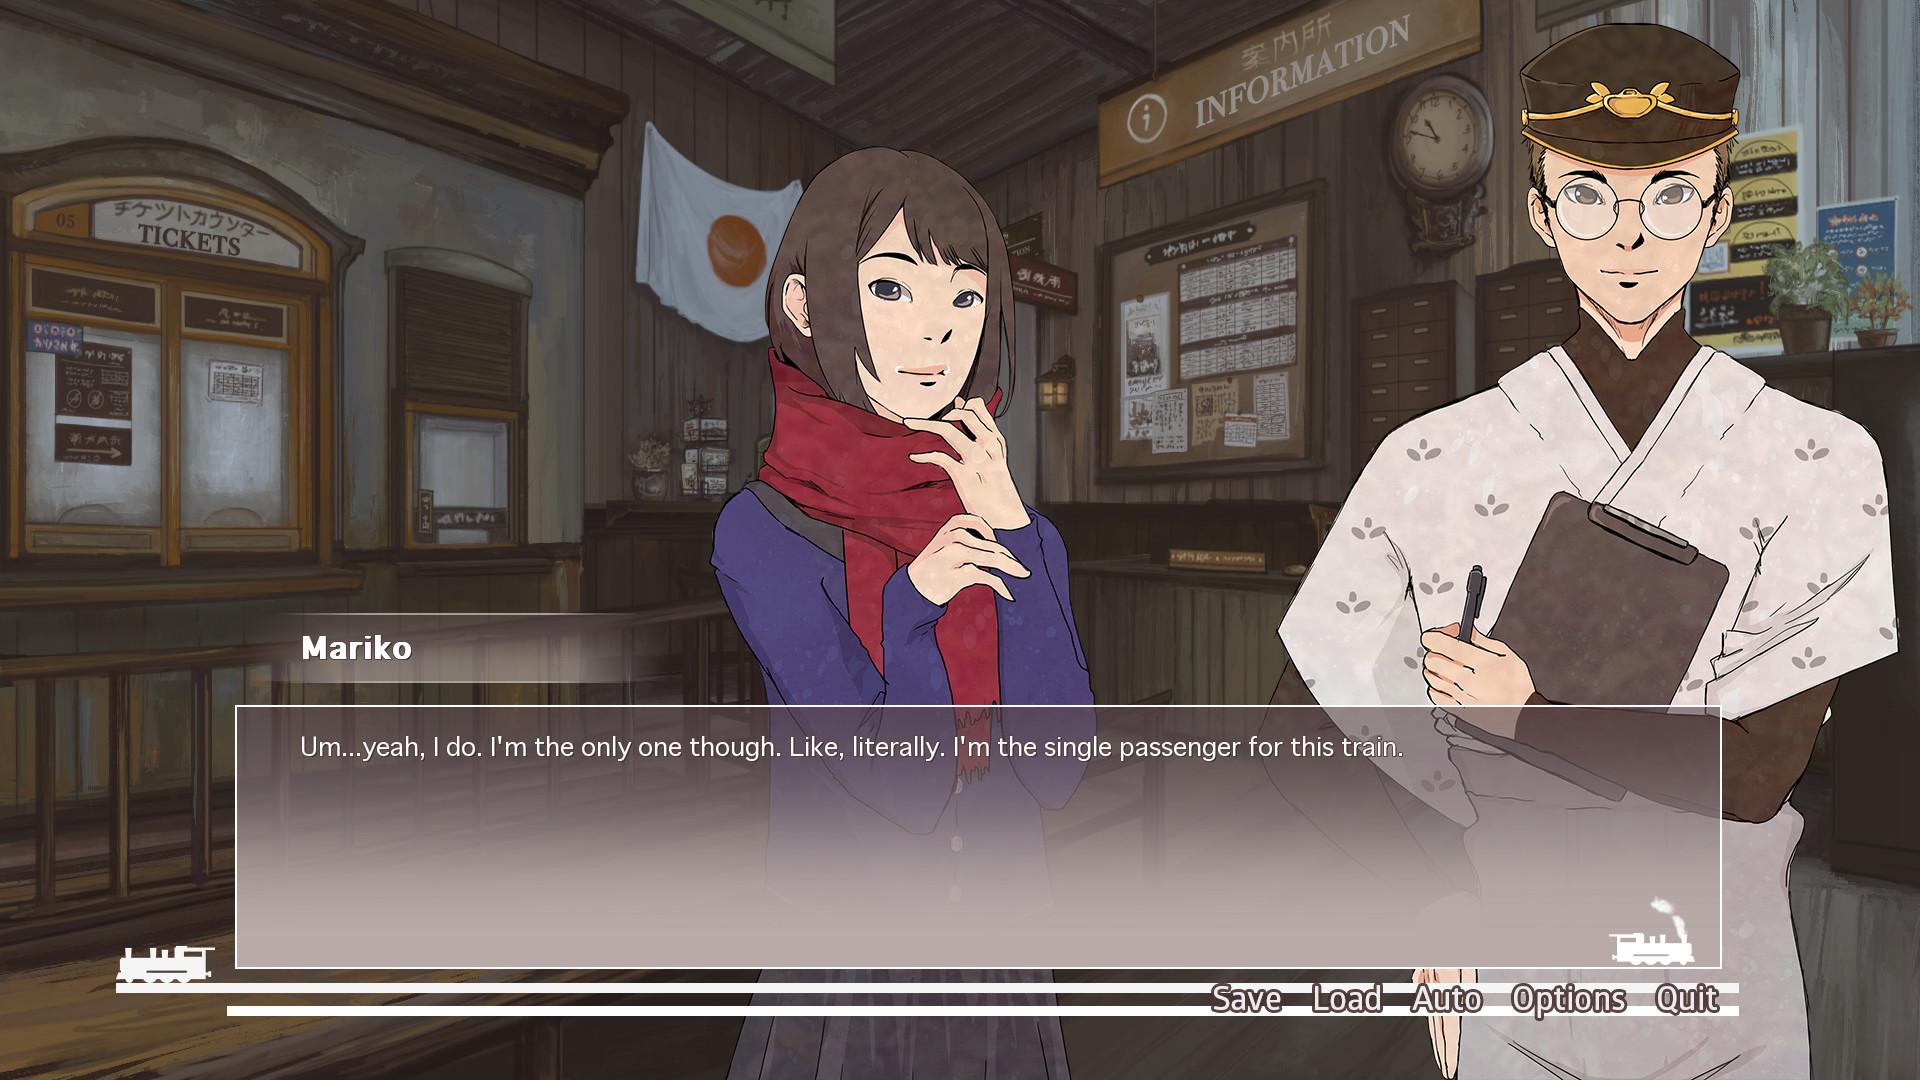 Screenshot №2 from game When Our Journey Ends - A Visual Novel